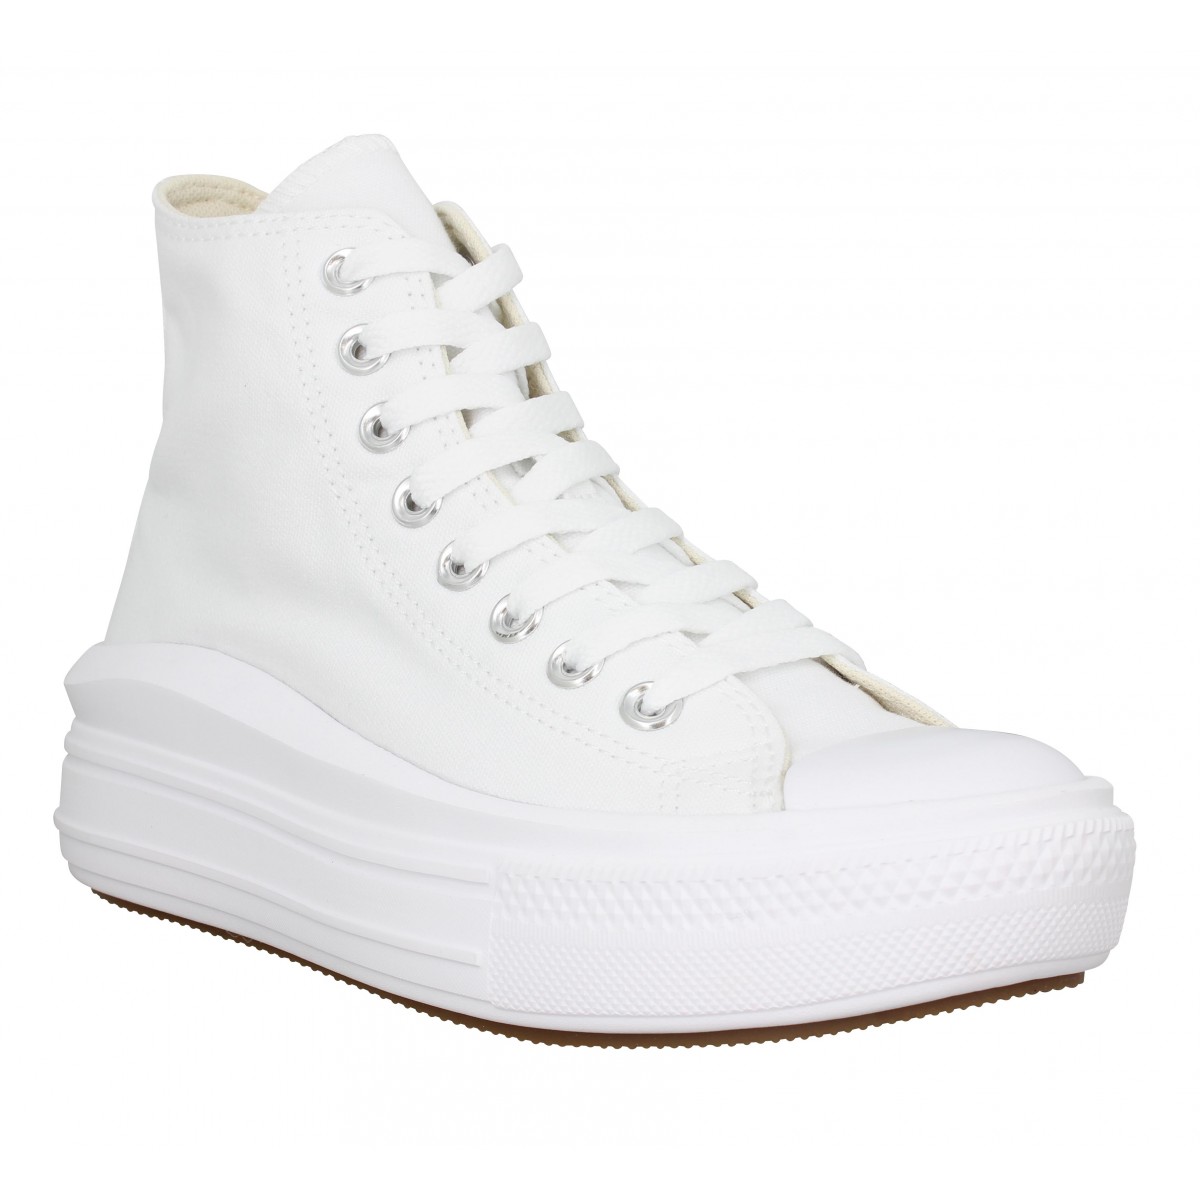 Chaussures Converse chuck taylor all star move hi toile femme blanc femme